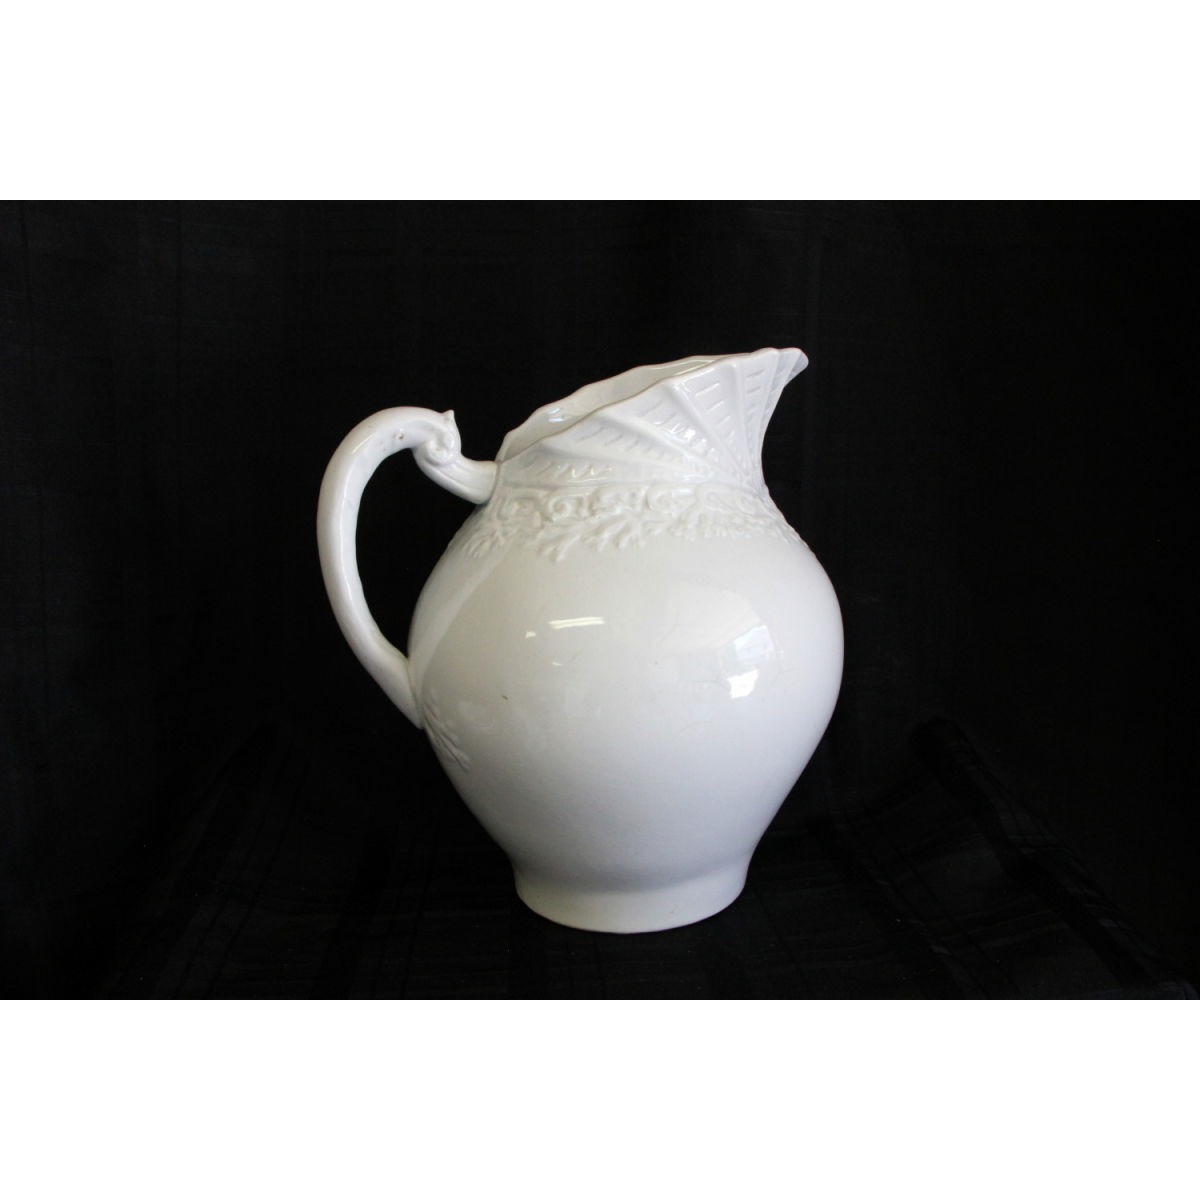 Gorgeous Ironstone Pitcher with Ornate Shell Embossing